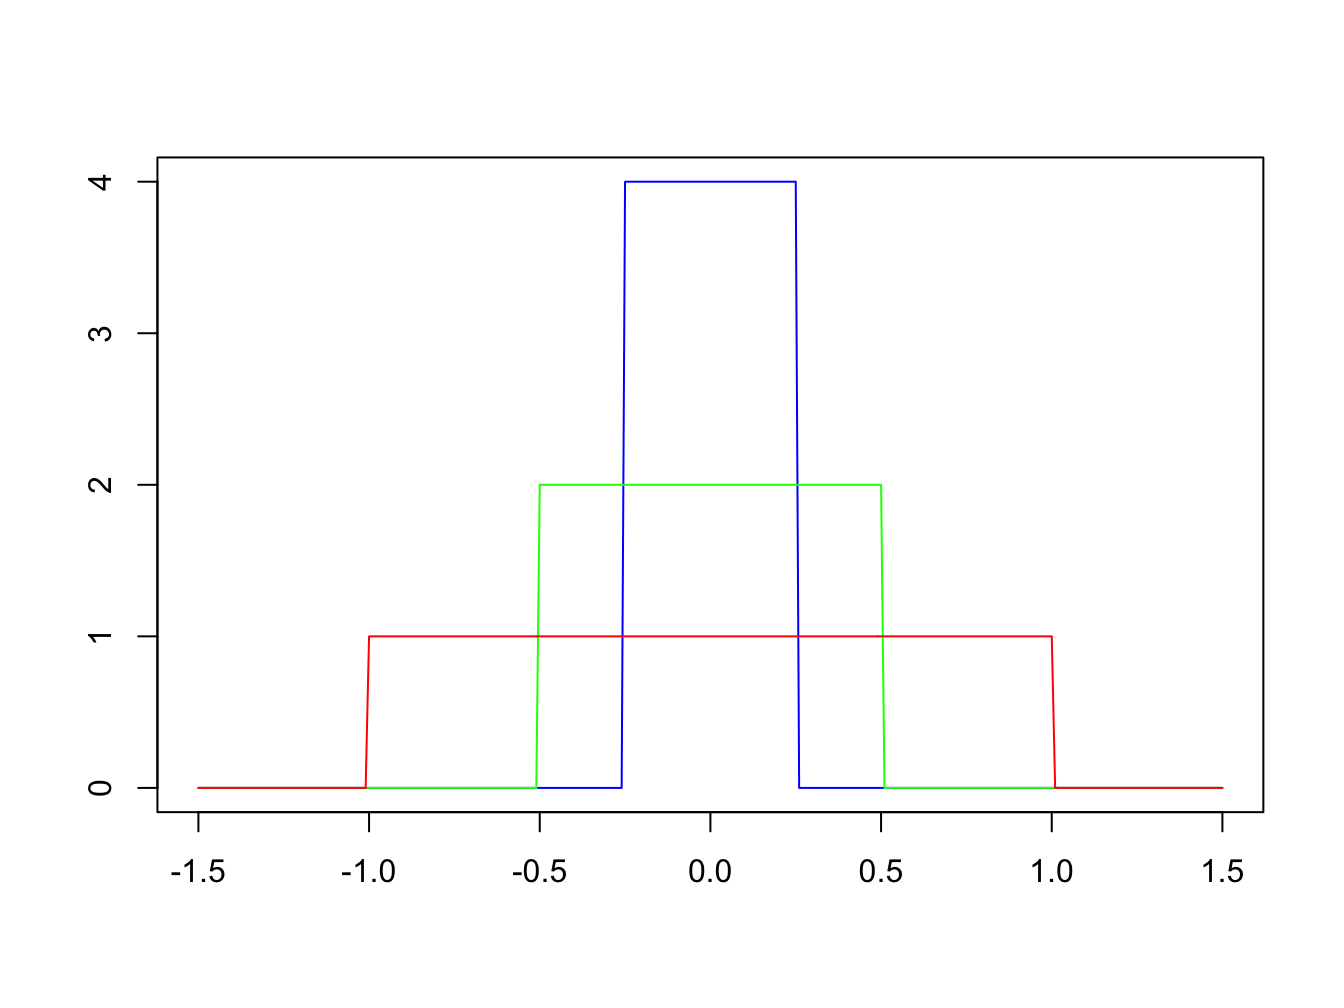 Graph of $f_k(x)$ for $k = 1$ (green), $k = 2$ (red) and $k =4$ (blue).